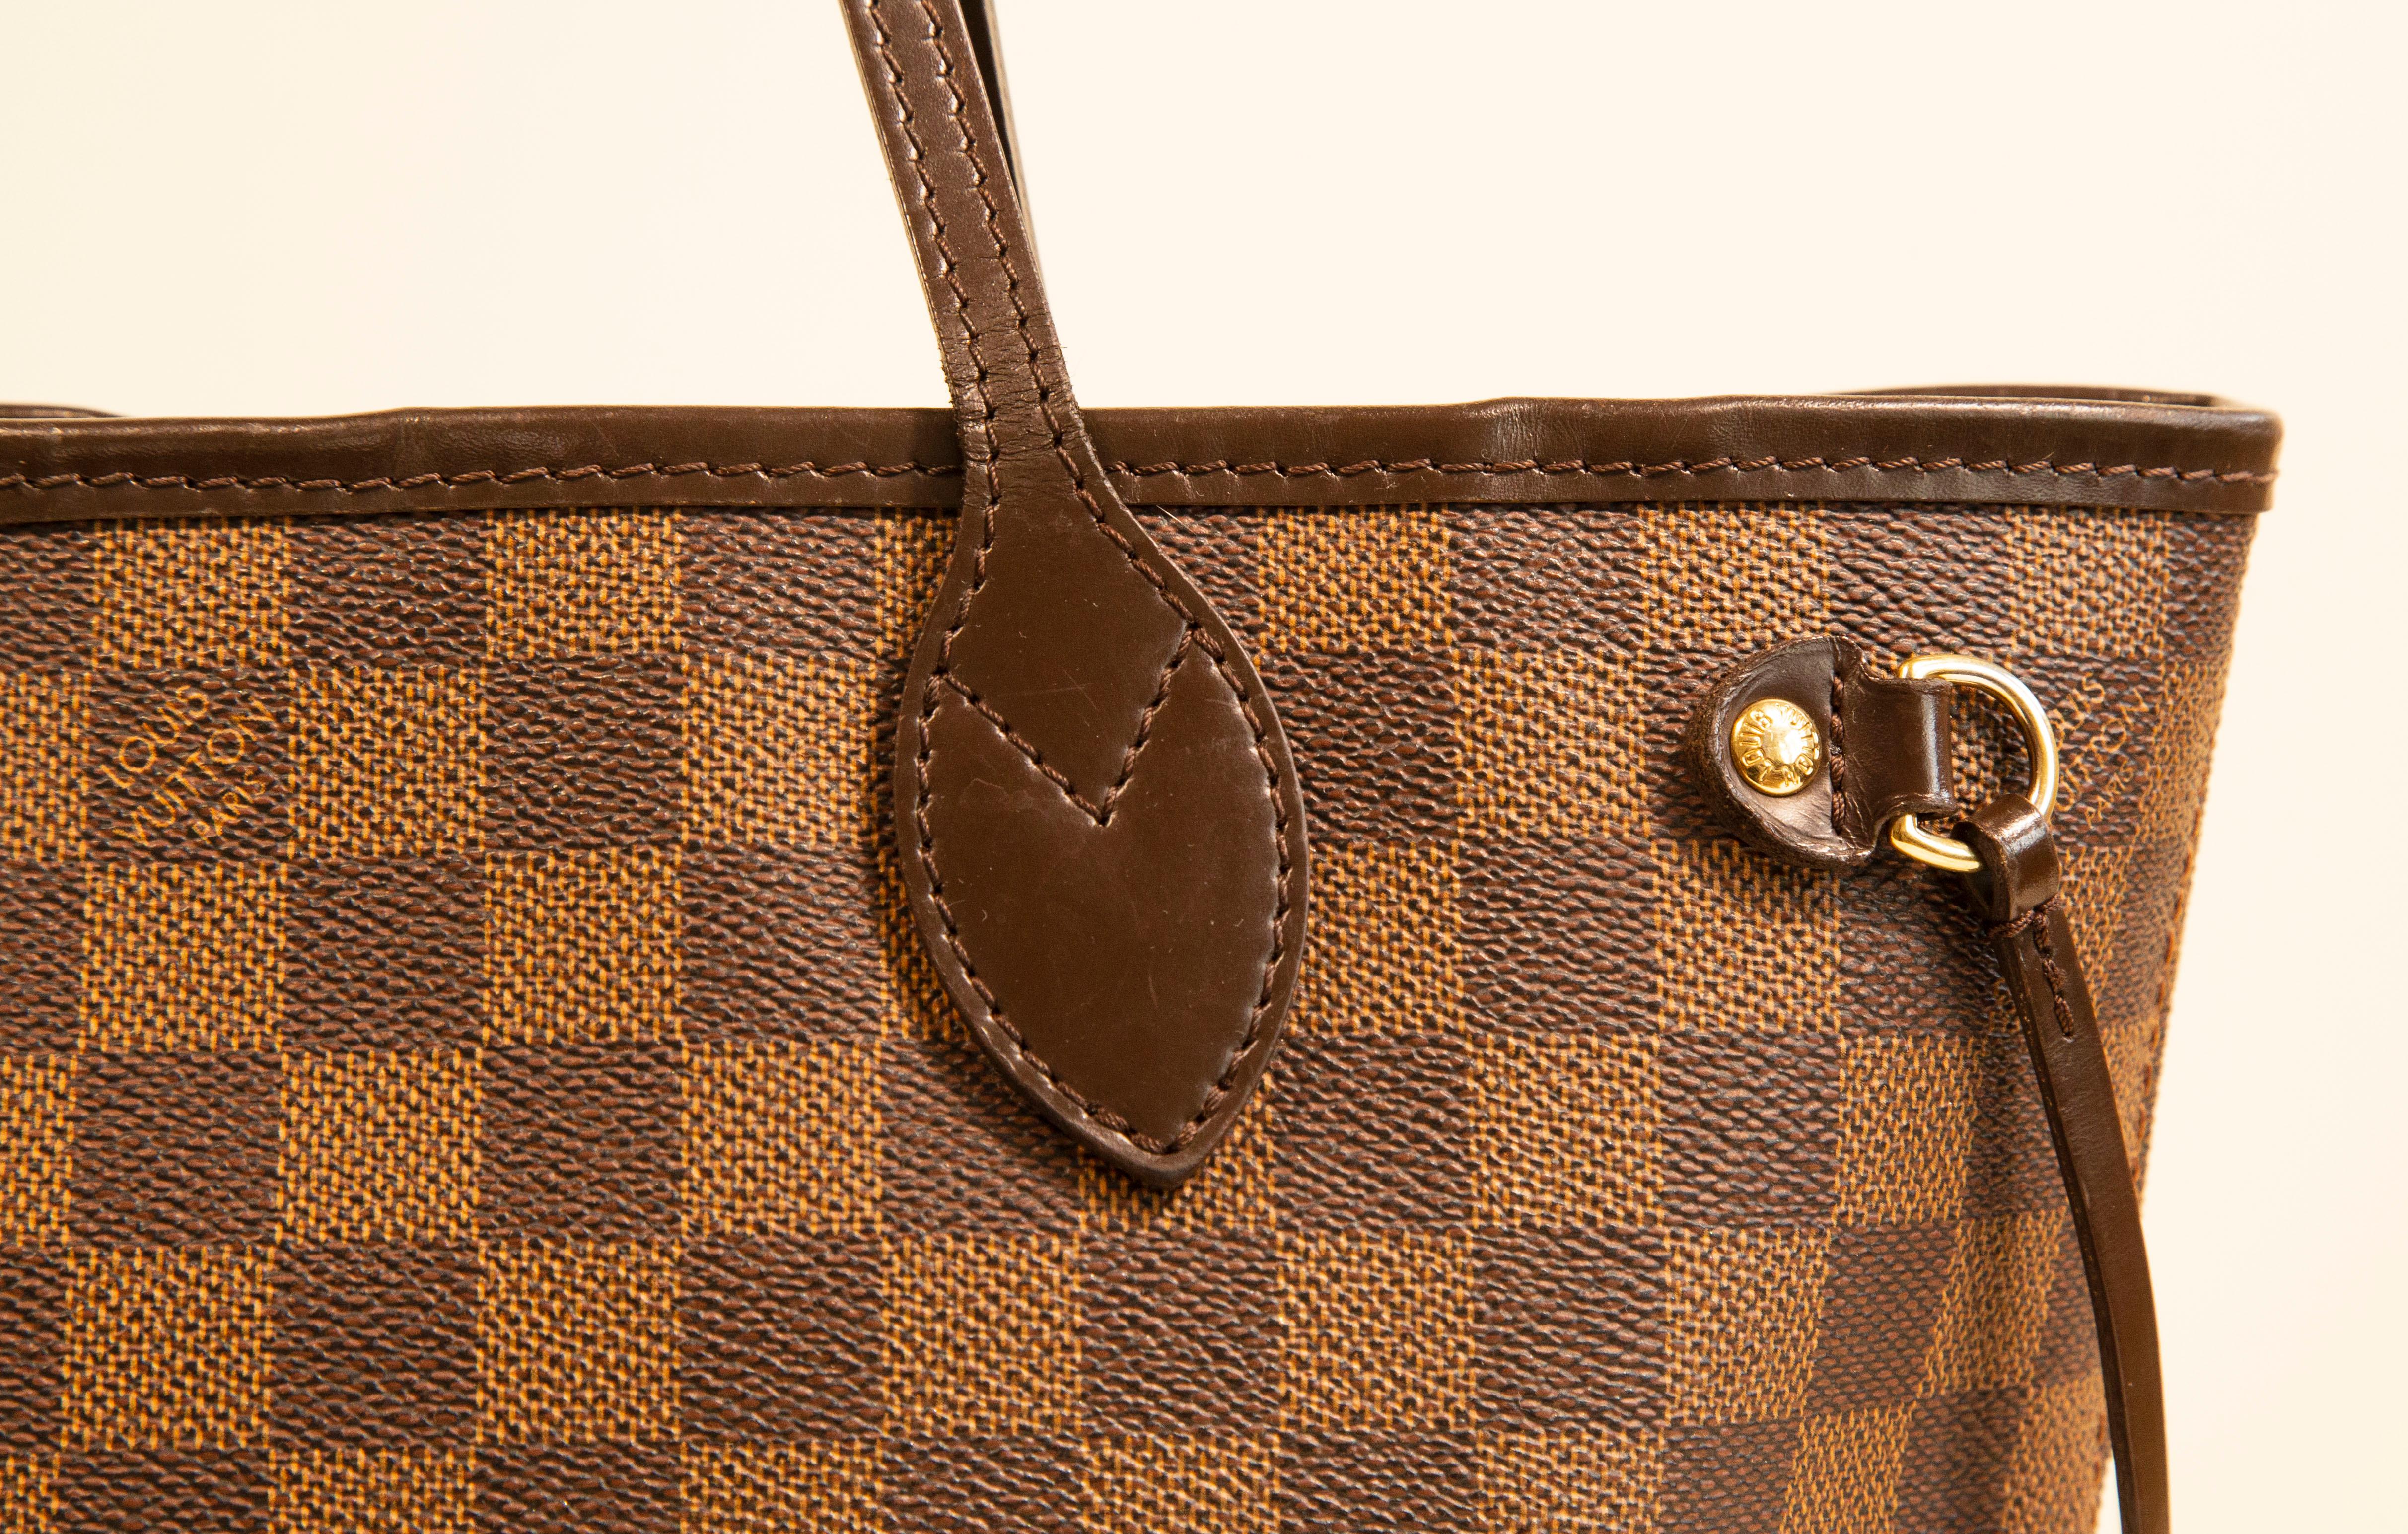 Louis Vuitton Neverfull PM Tote Shoulder Bag in Damier Ebene For Sale 1